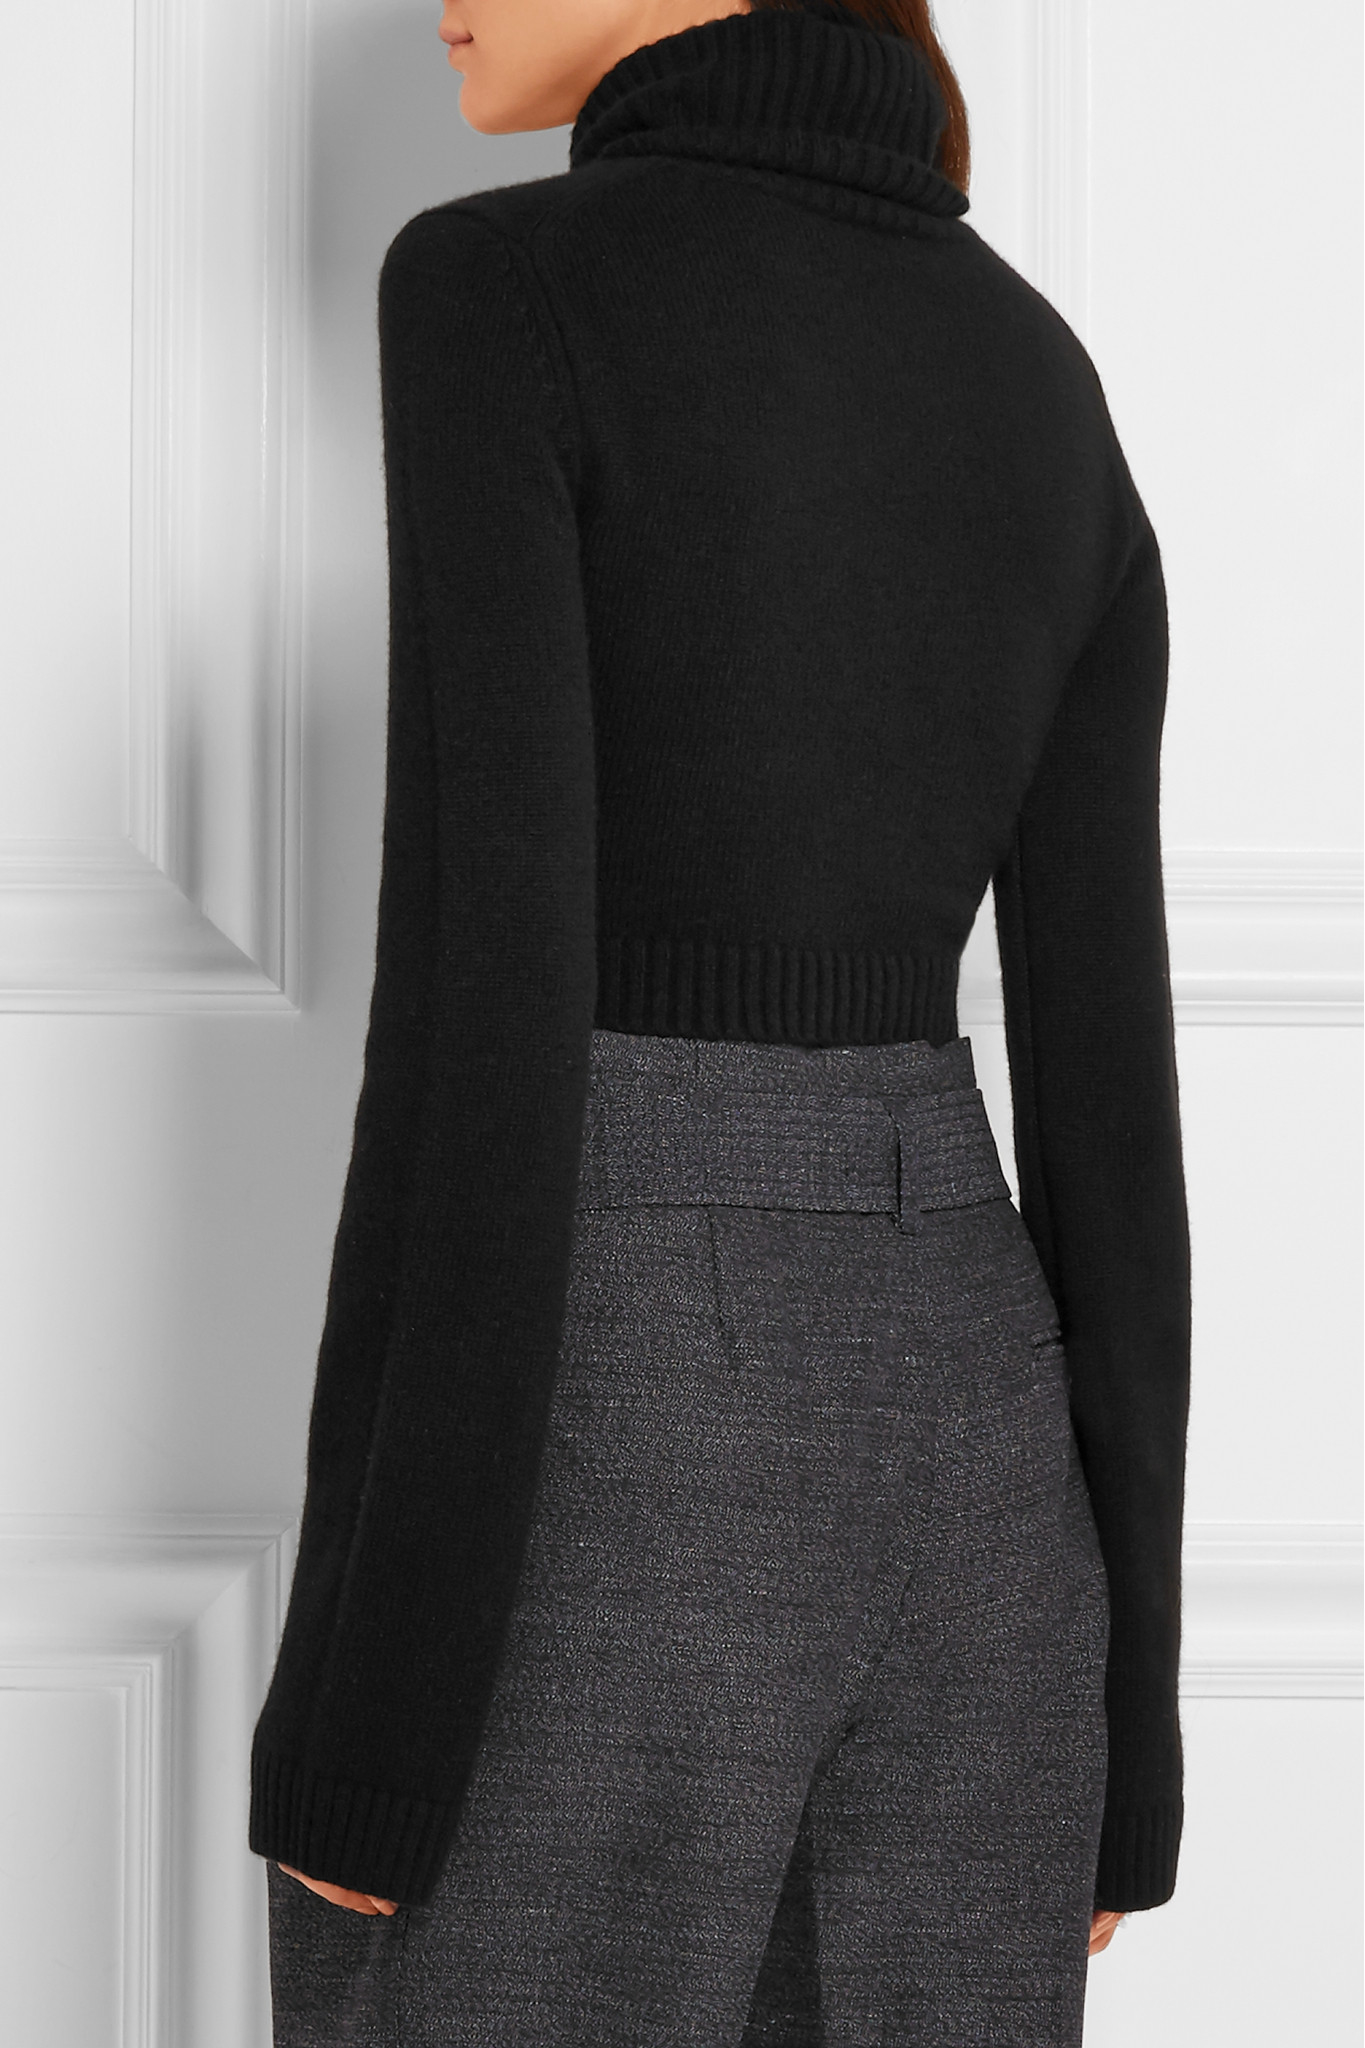 Michael Kors Cropped Cashmere Turtleneck Sweater in Black - Lyst